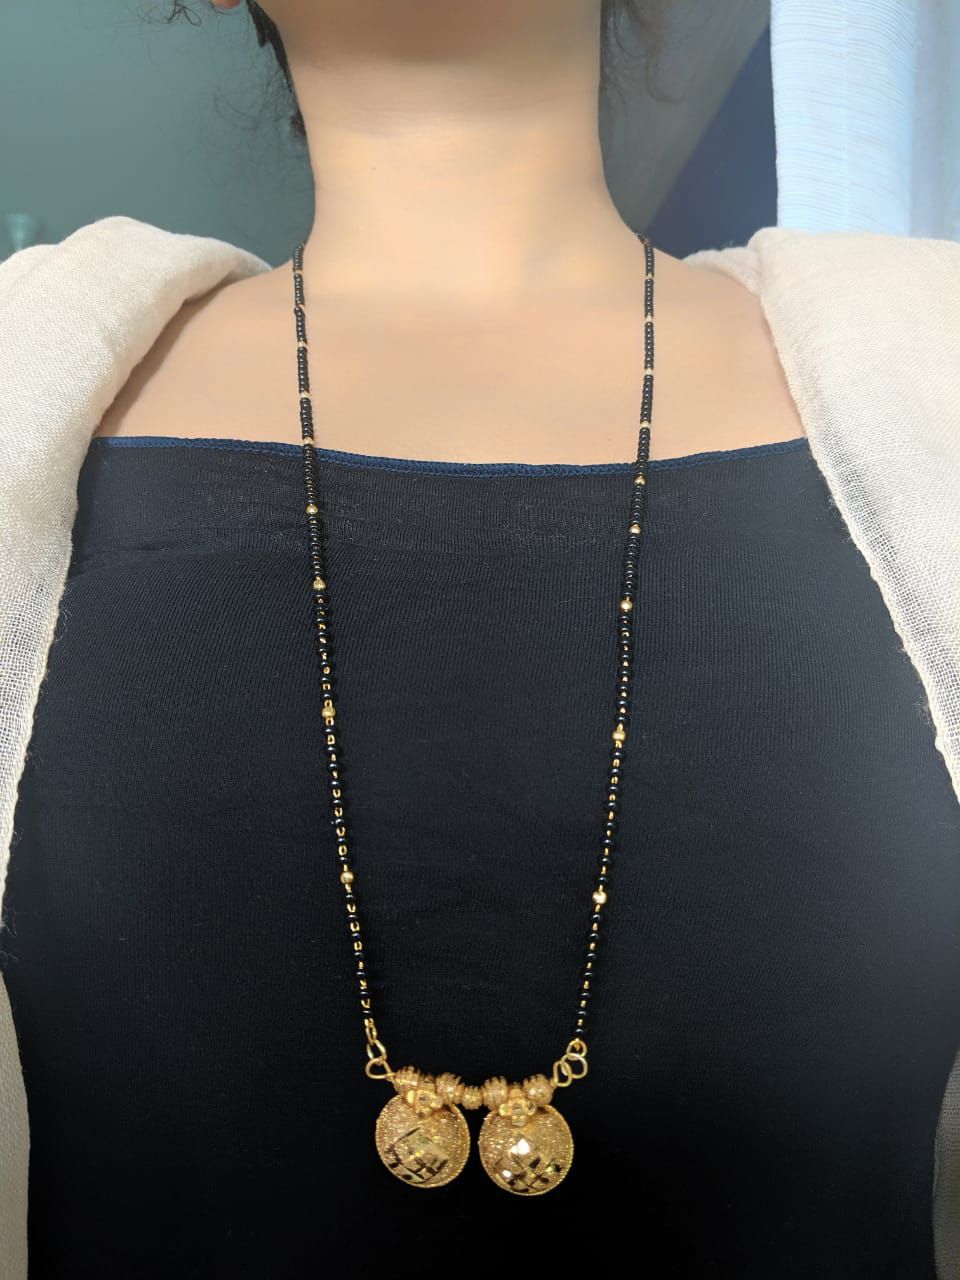     			Digital Jewellery Women's Pride Gold Plated Alloy 2 Vati Tanmaniya Pendant Mangalsutra 32-inch Length Chain Traditional Golden Black Mani Beads Single Line Layer Long Necklace for Girls